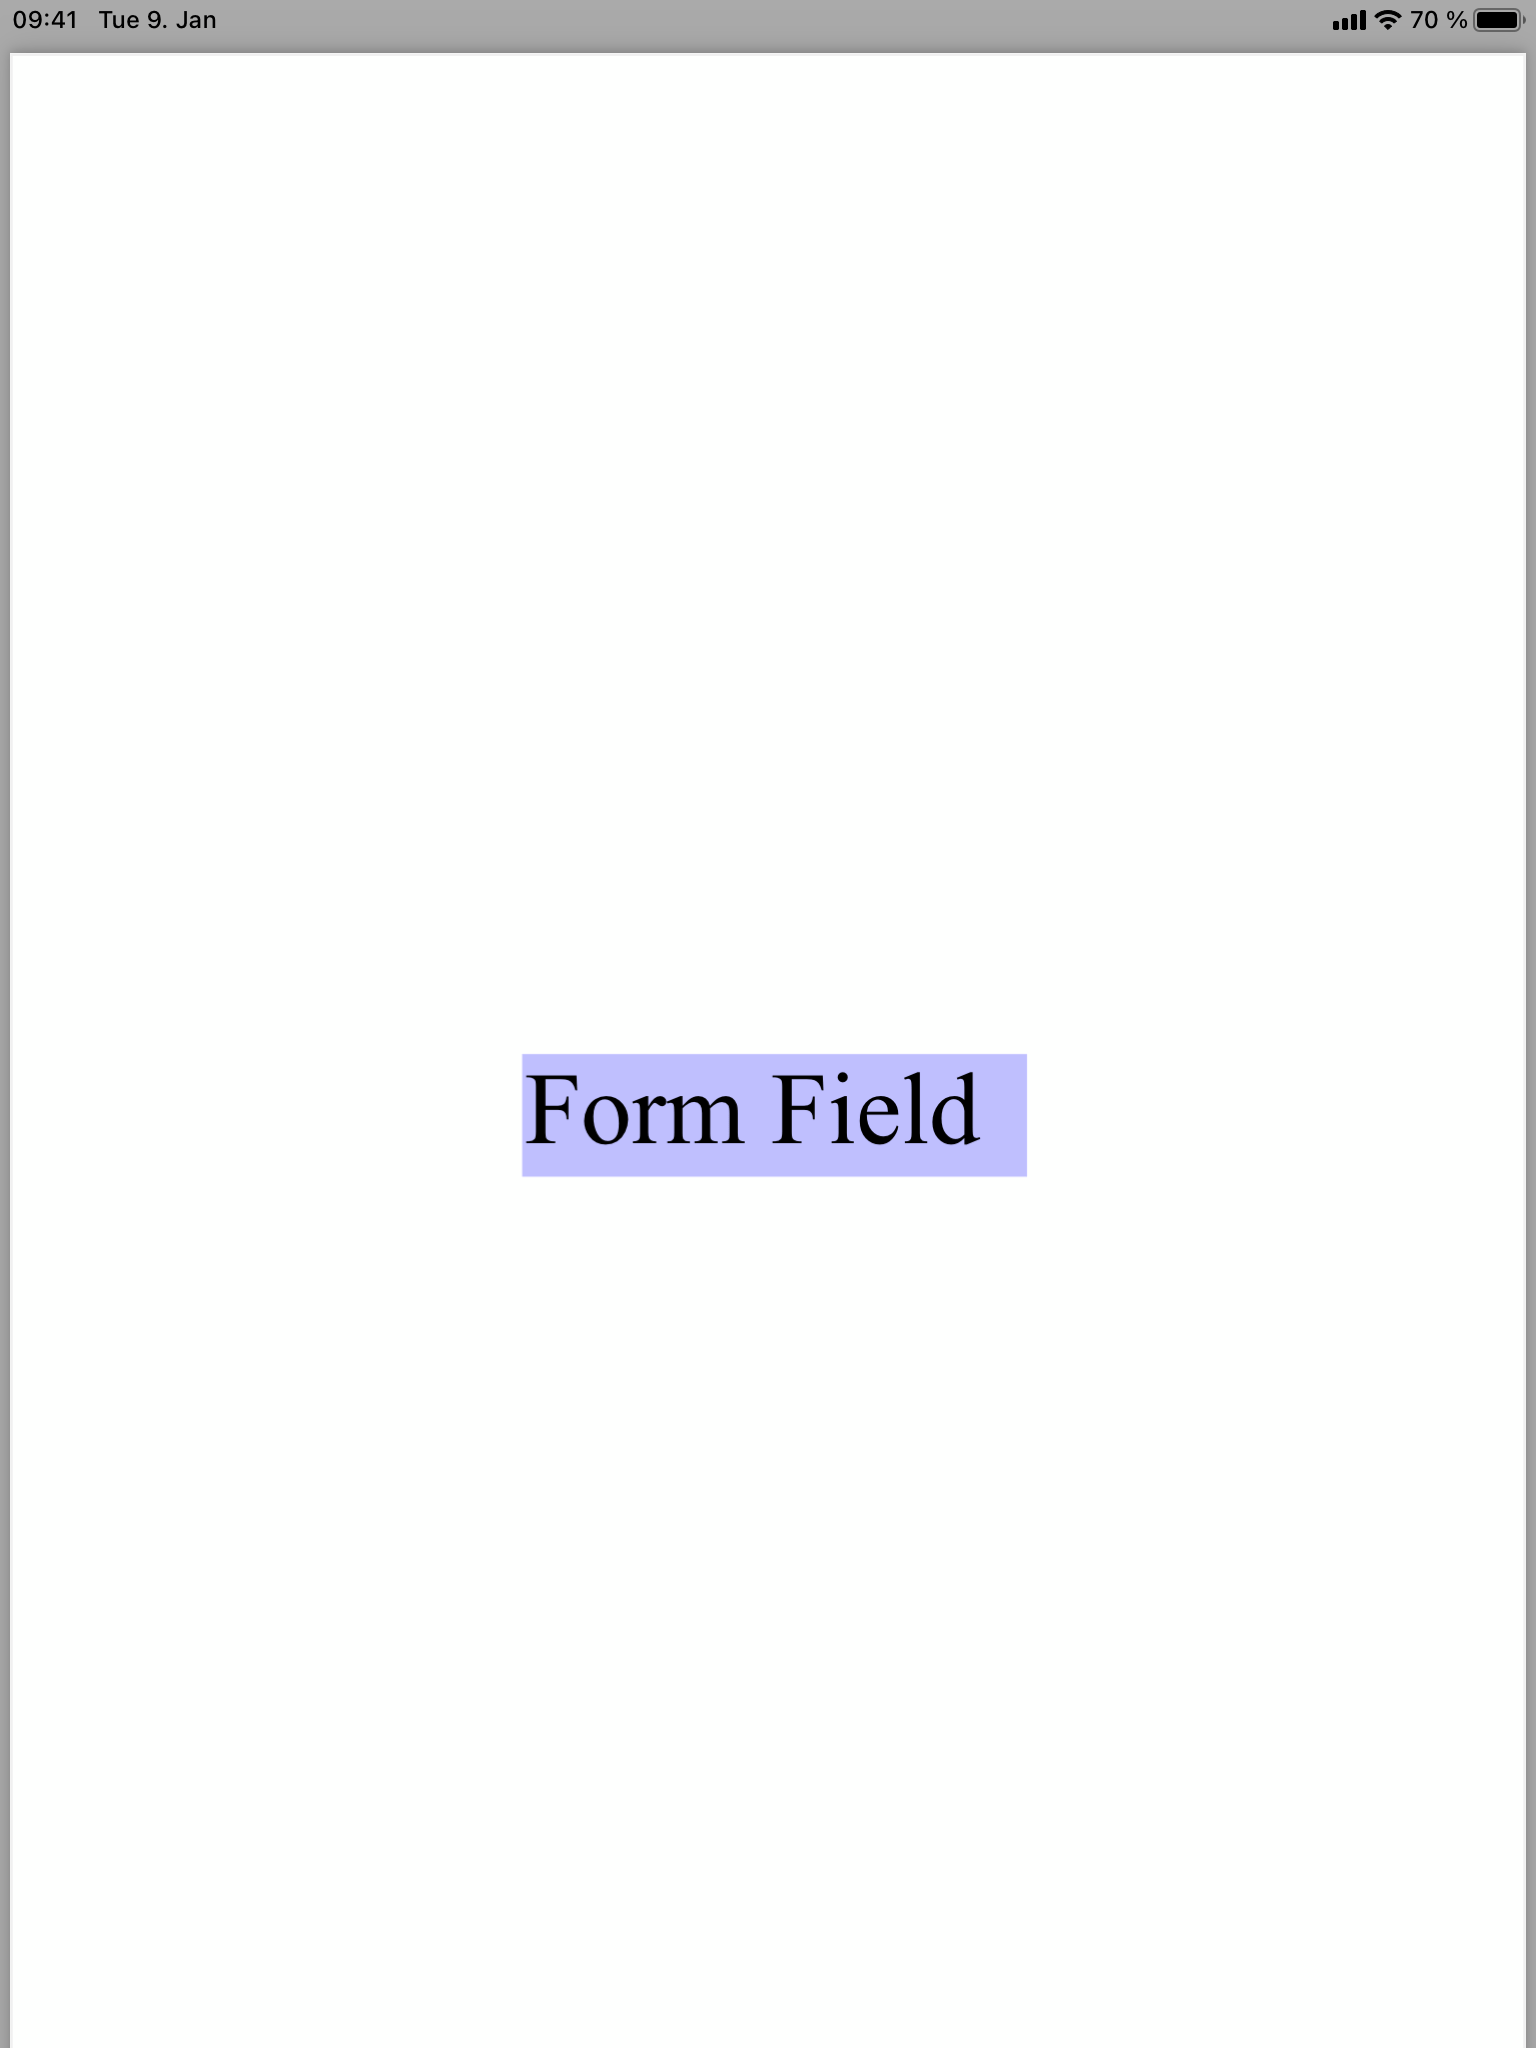 PDFKit form field annotation example